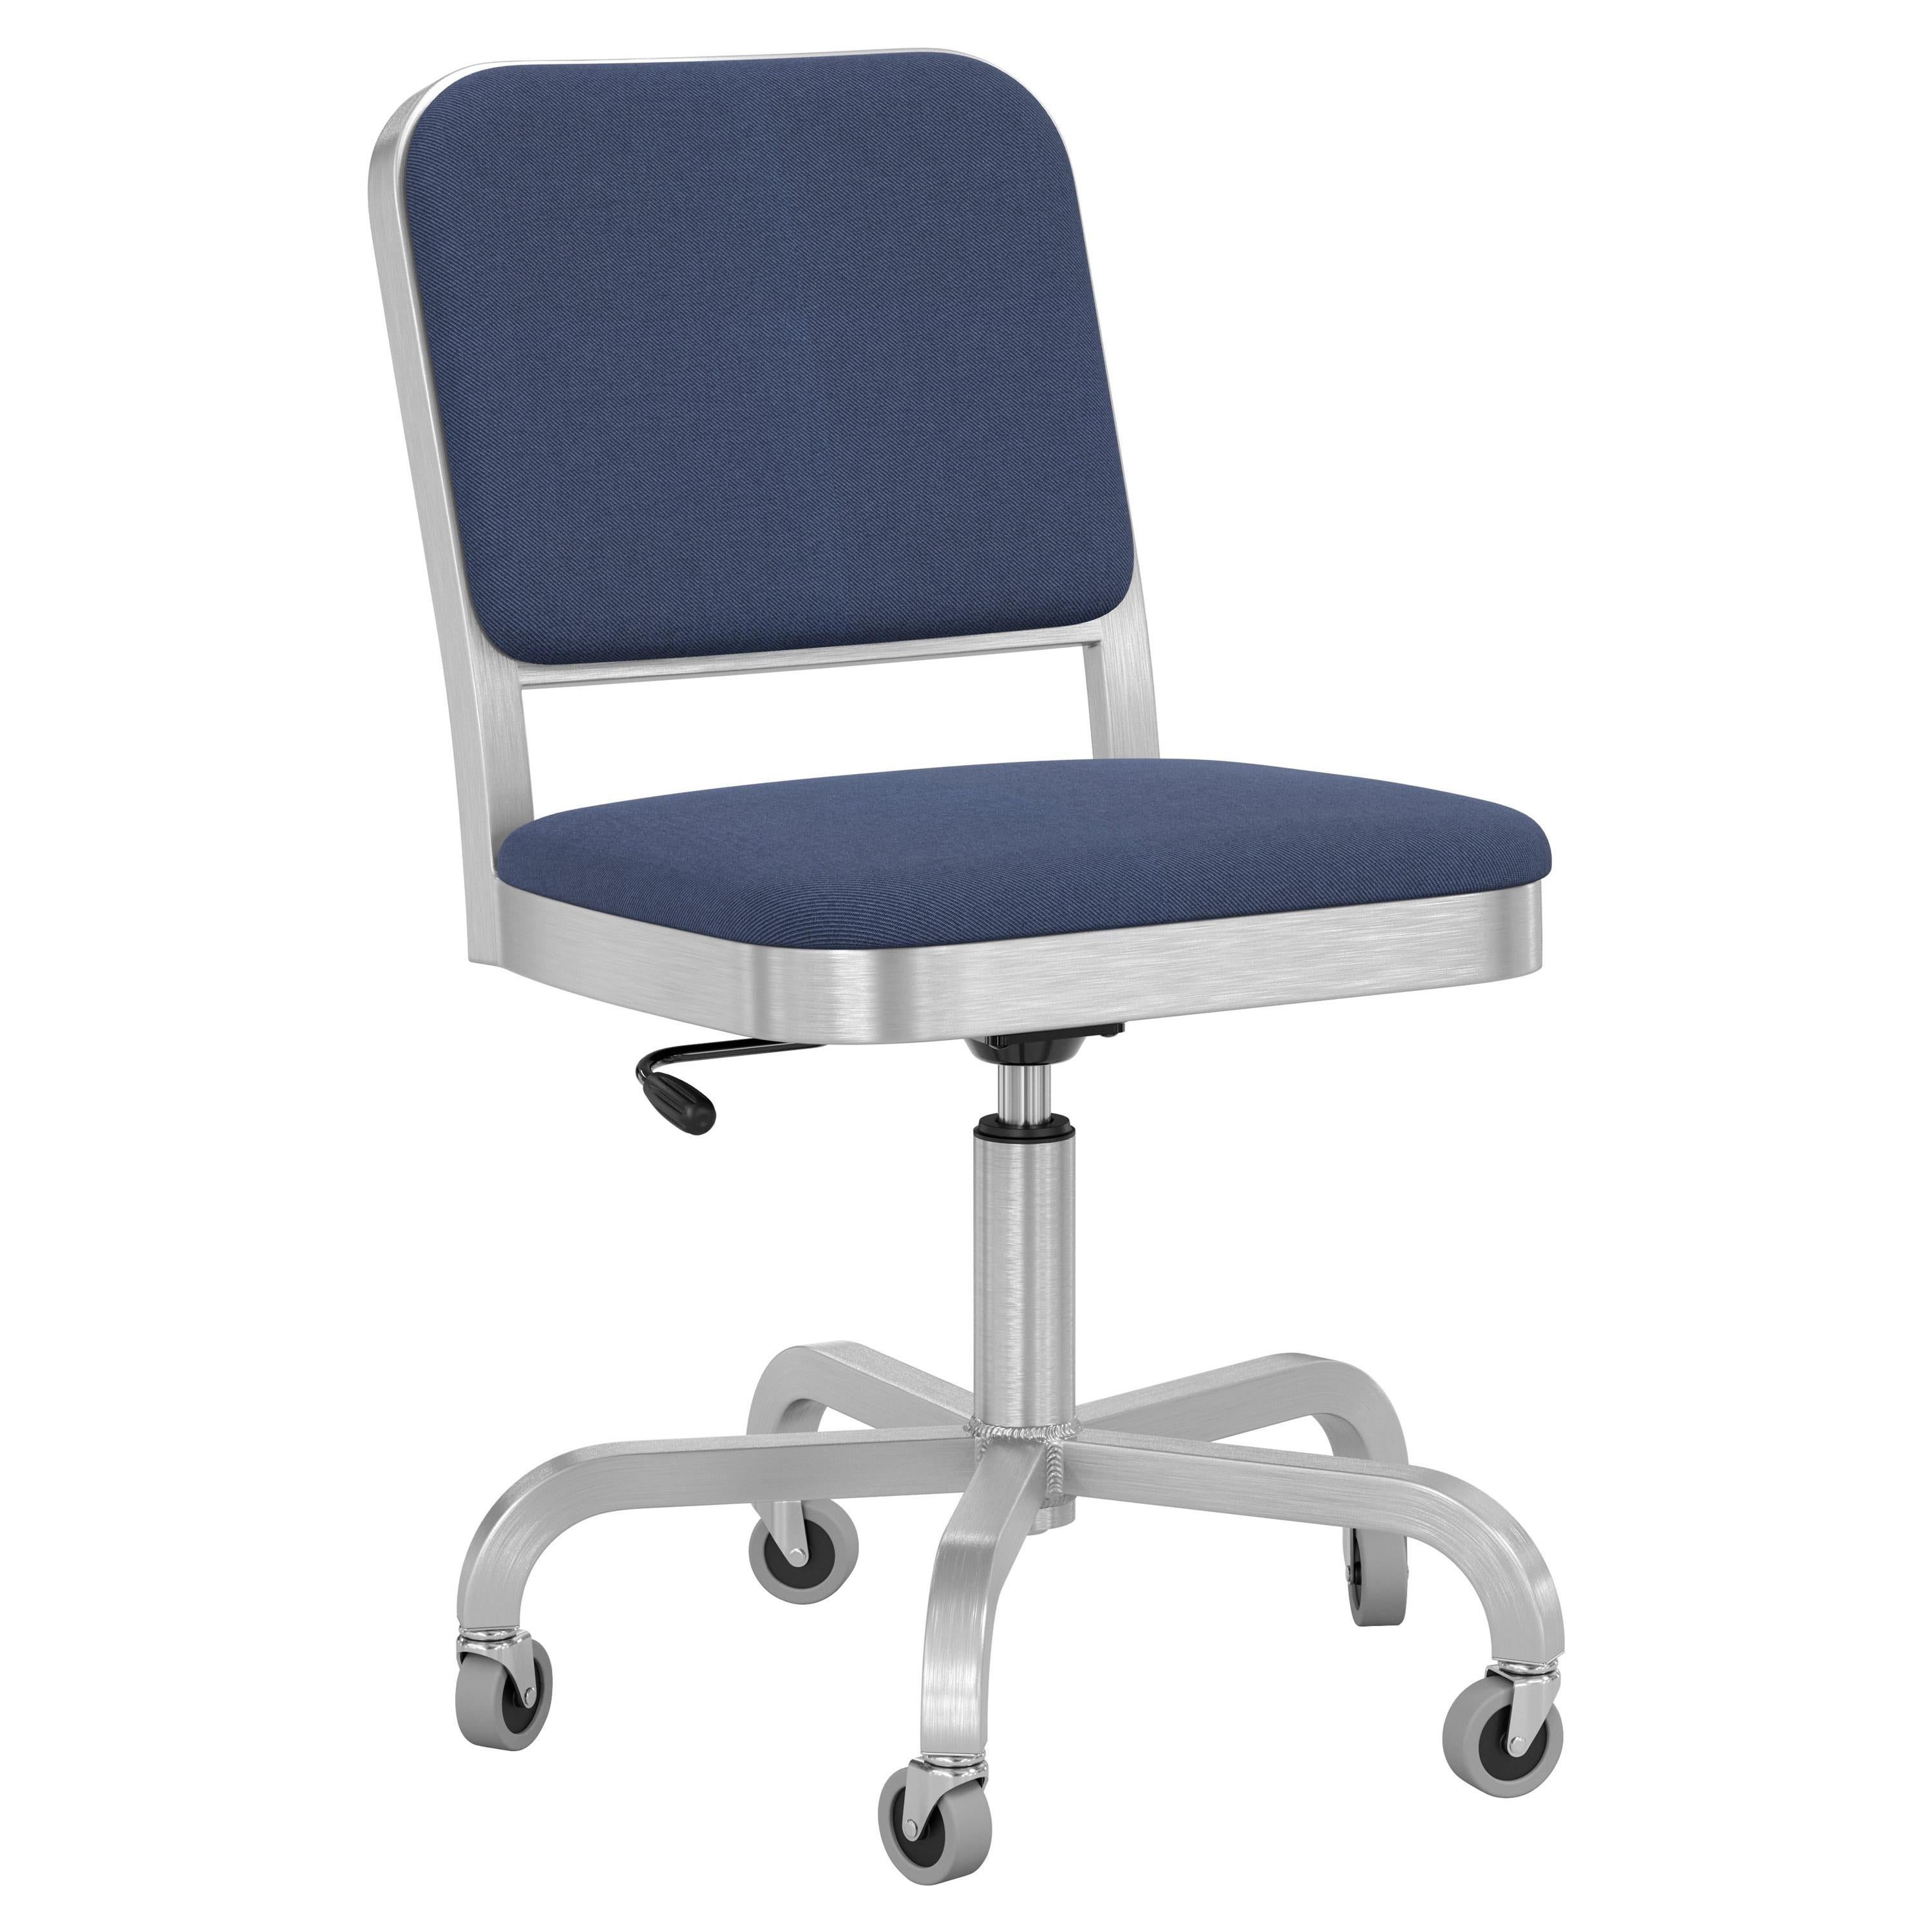 Emeco Navy Officer Swivel Chair in Navy Blue Fabric with Aluminum Frame